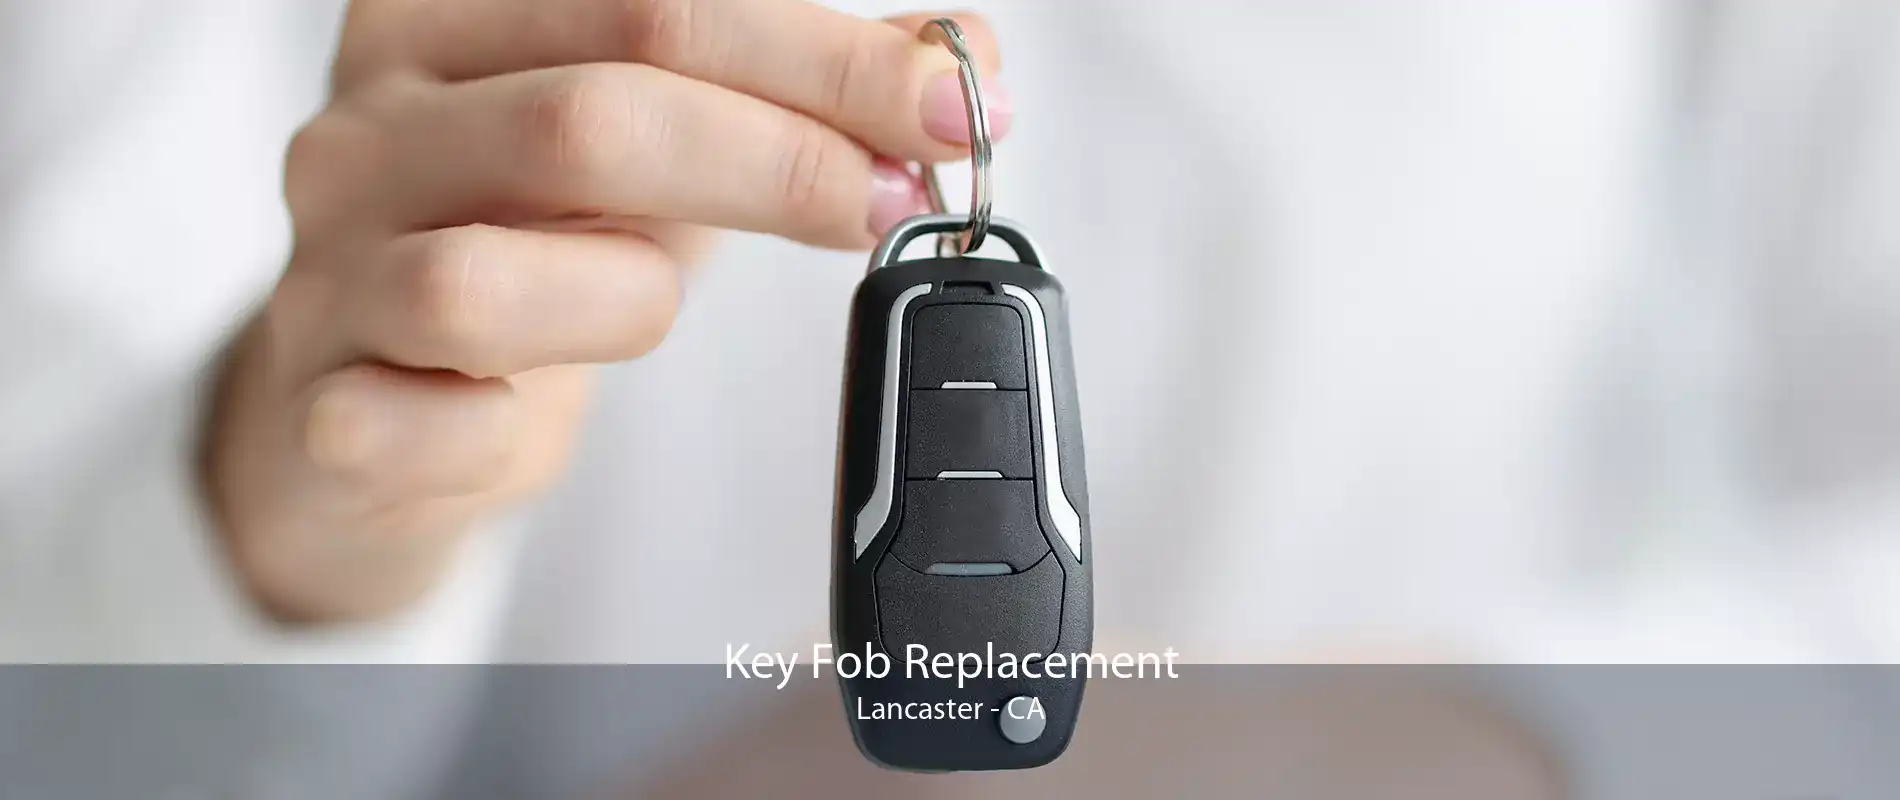 Key Fob Replacement Lancaster - CA